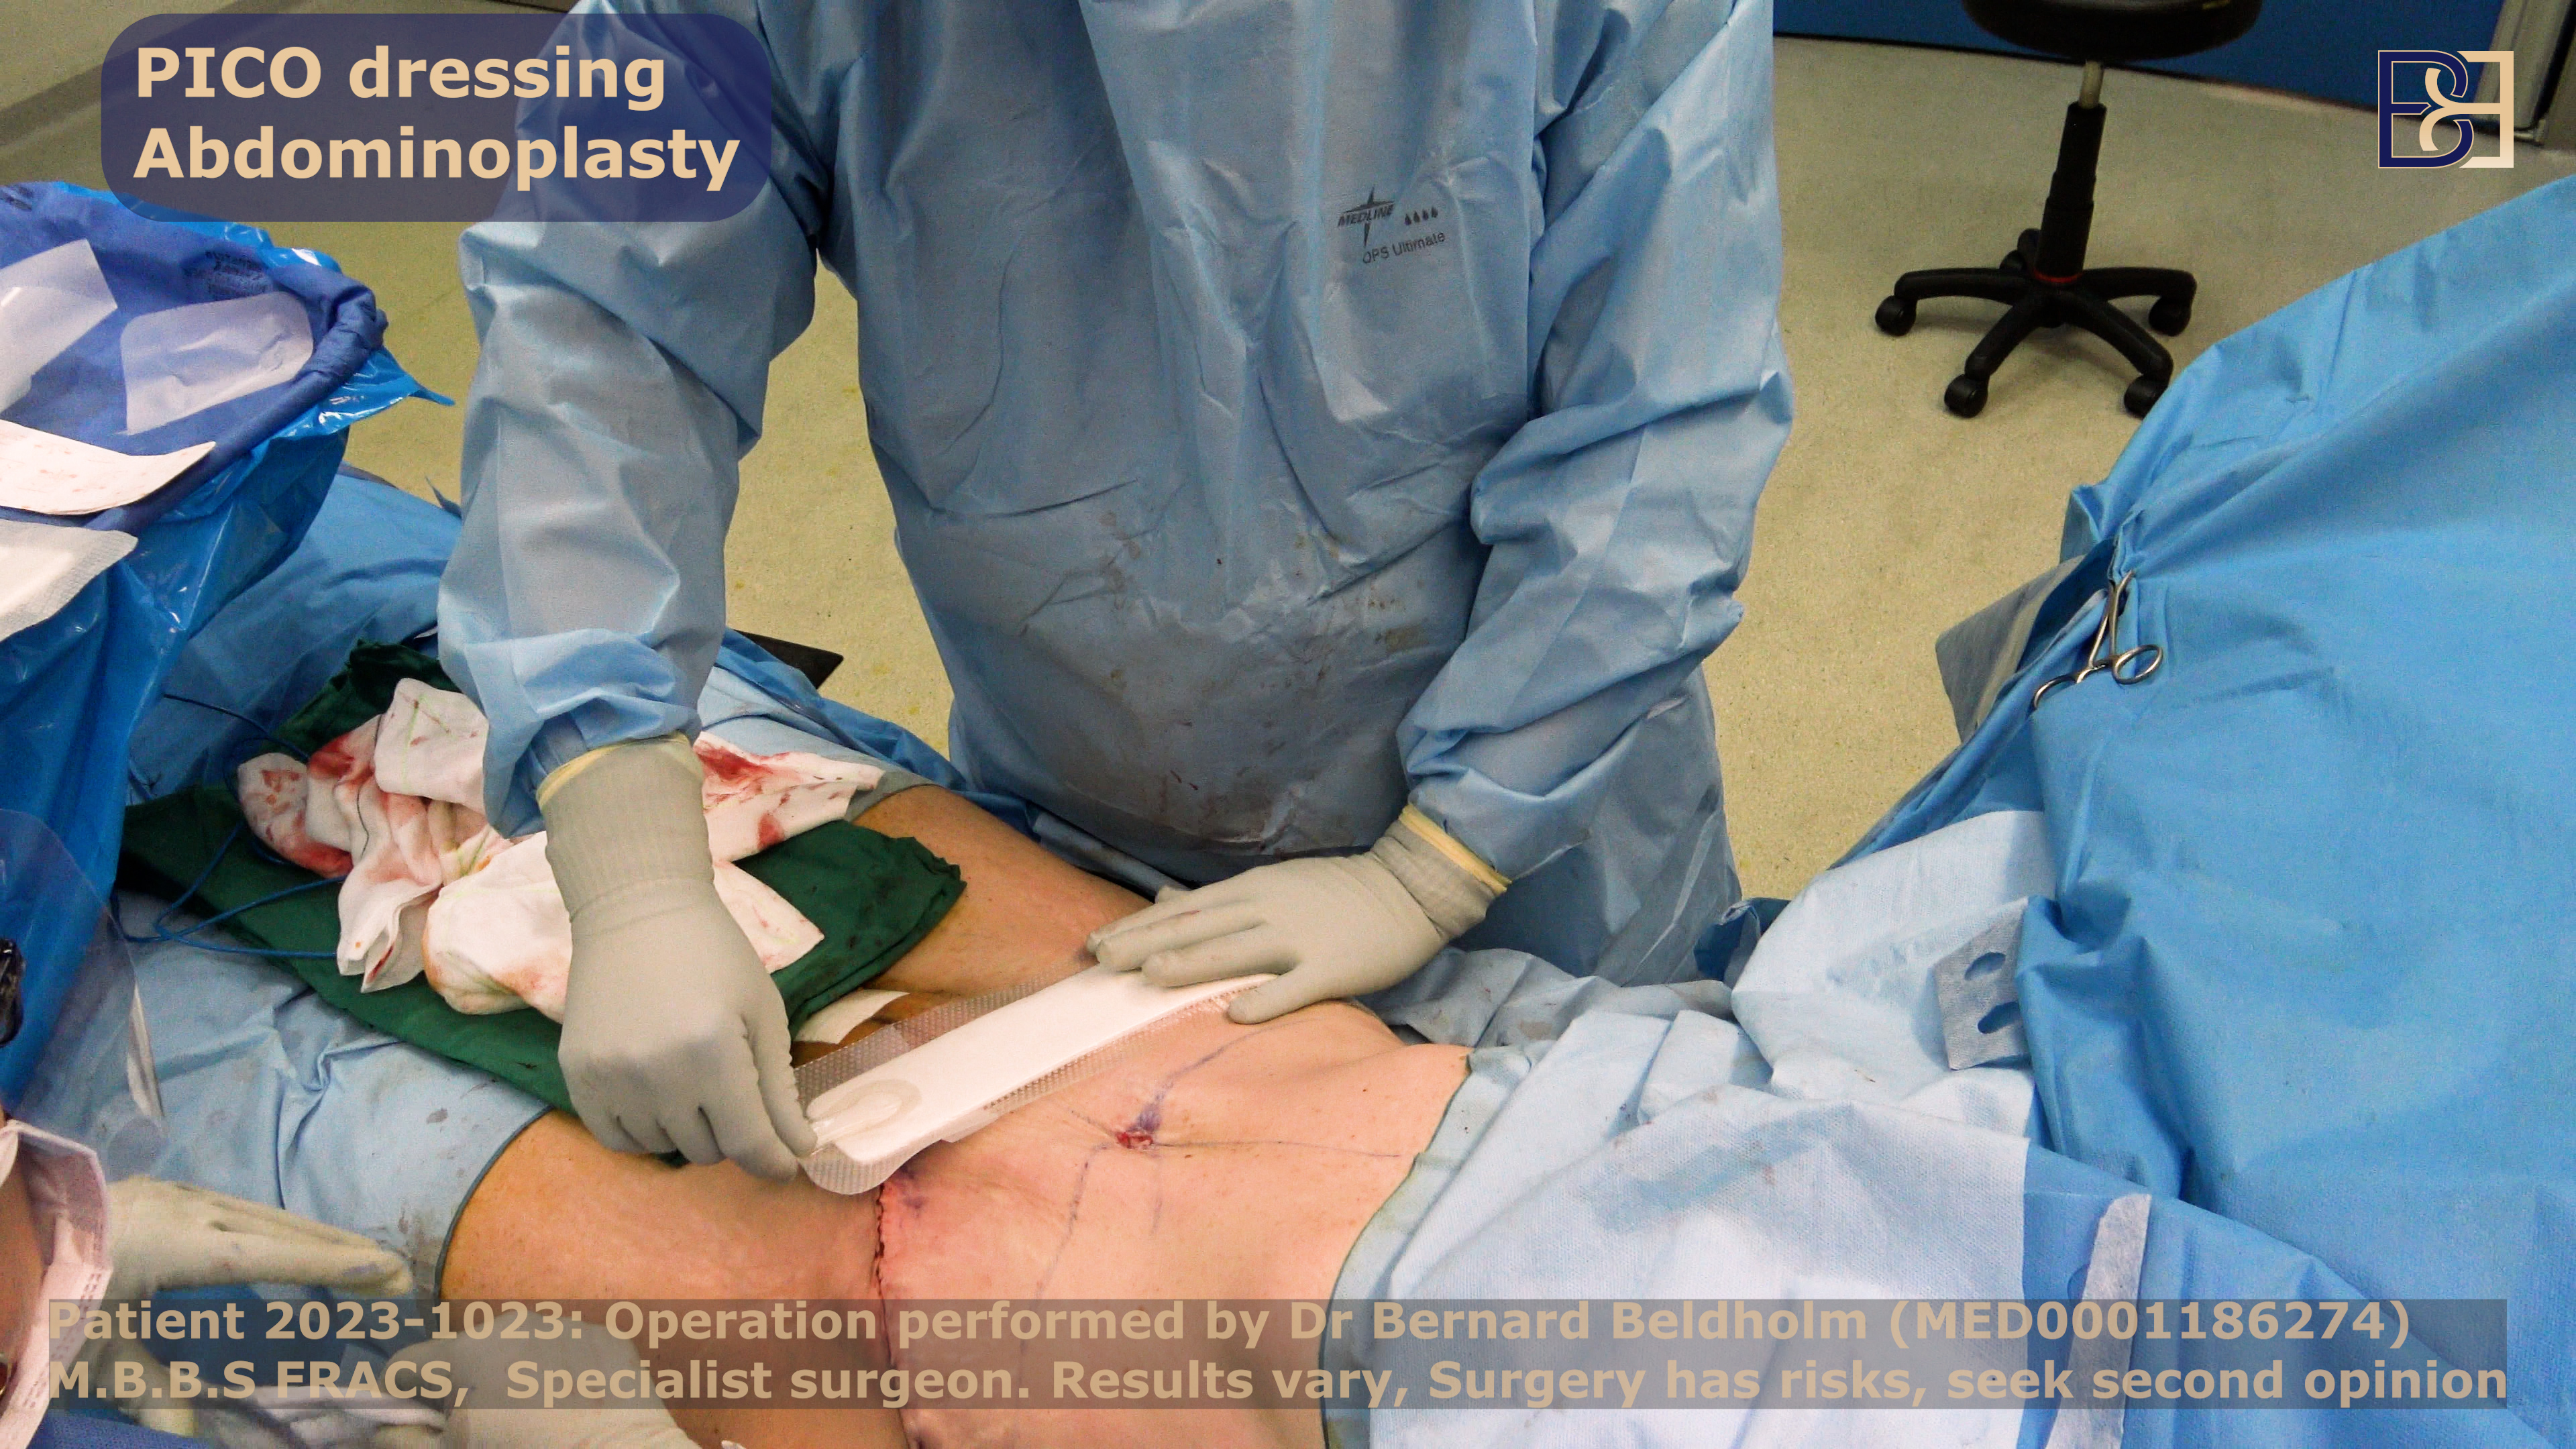 Applying PICO dressing at the end of Abdominoplasty operation | DrBB